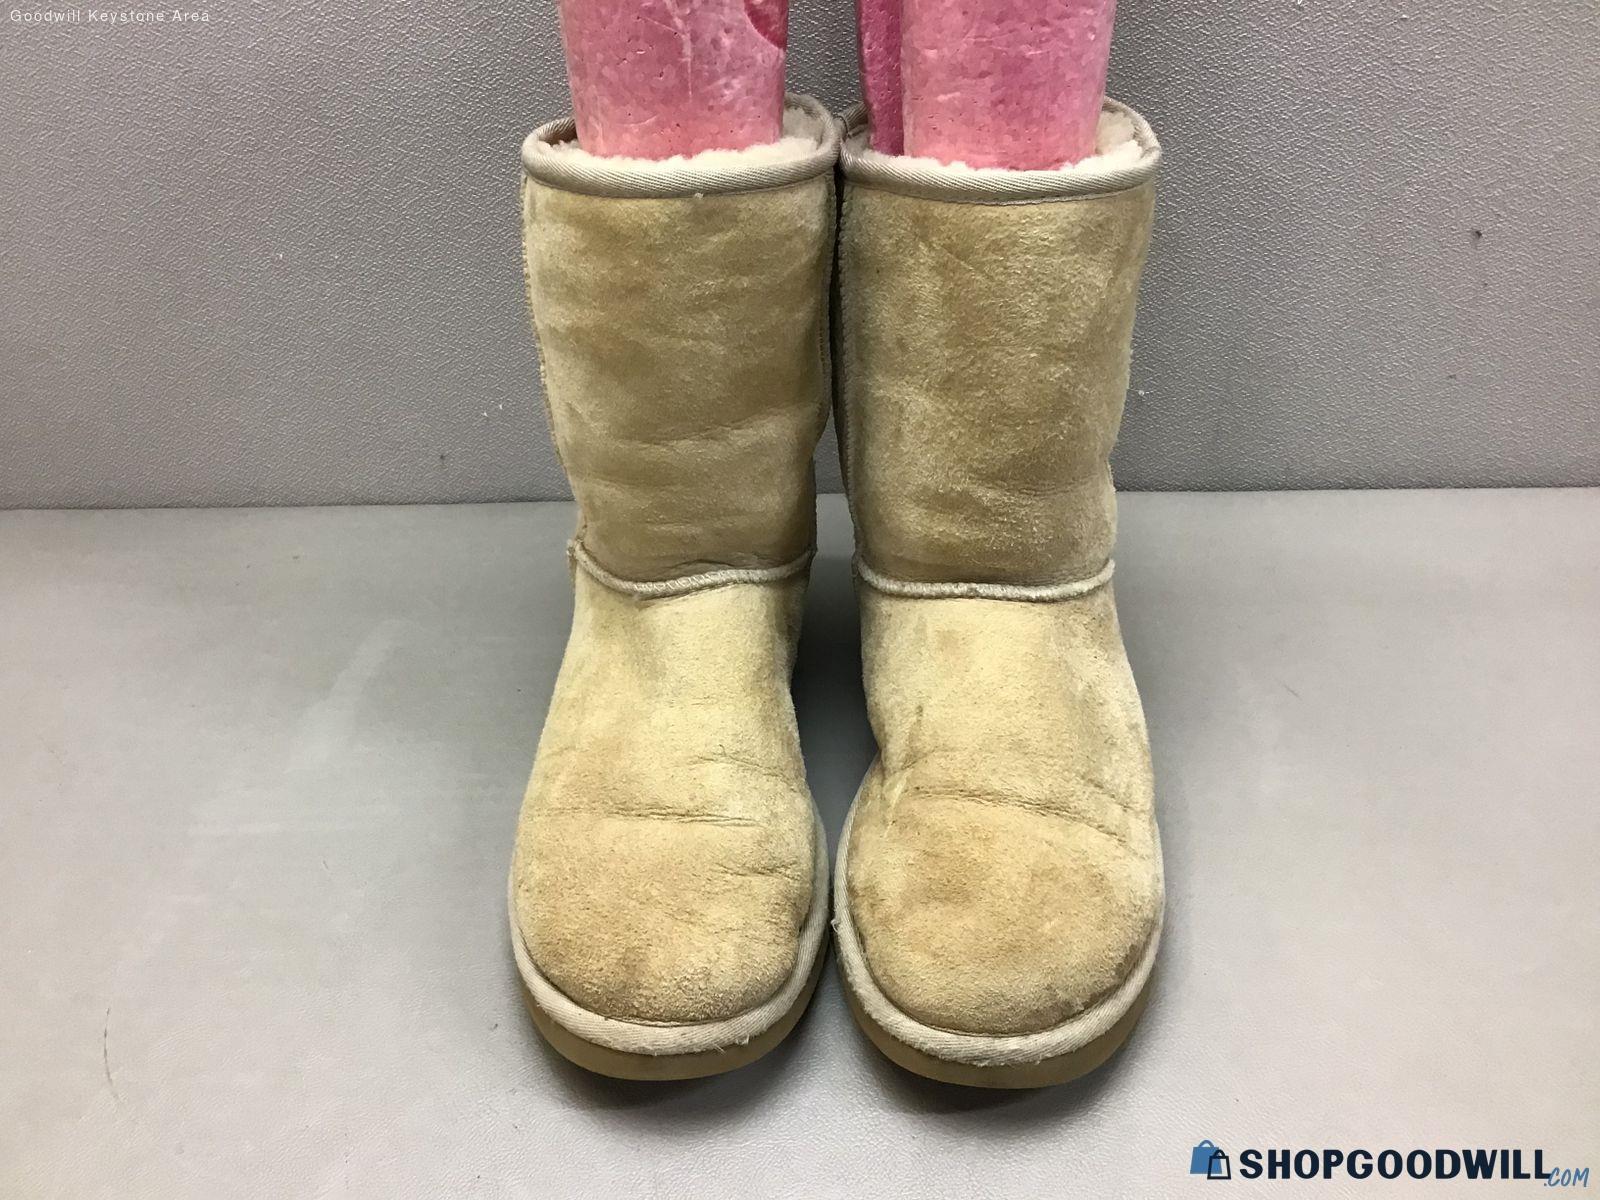 Ugg Ladies Beige Boots - Size 8 - shopgoodwill.com